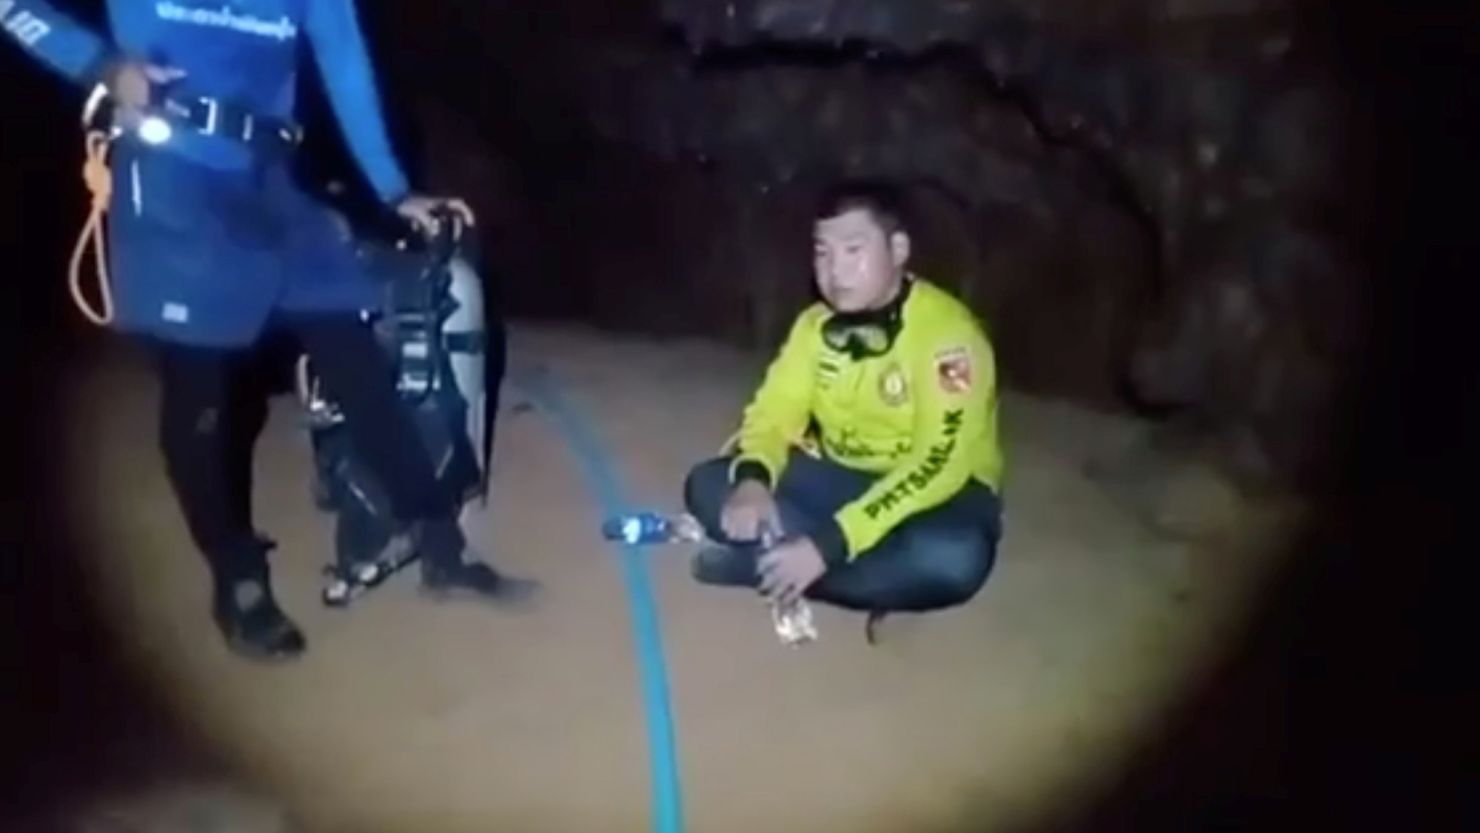 Rescue workers at Phra Sai Ngam cave during an operation to save a Thai monk trapped after the entrance was flooded in Noen Maprang, Thailand, on April 6.